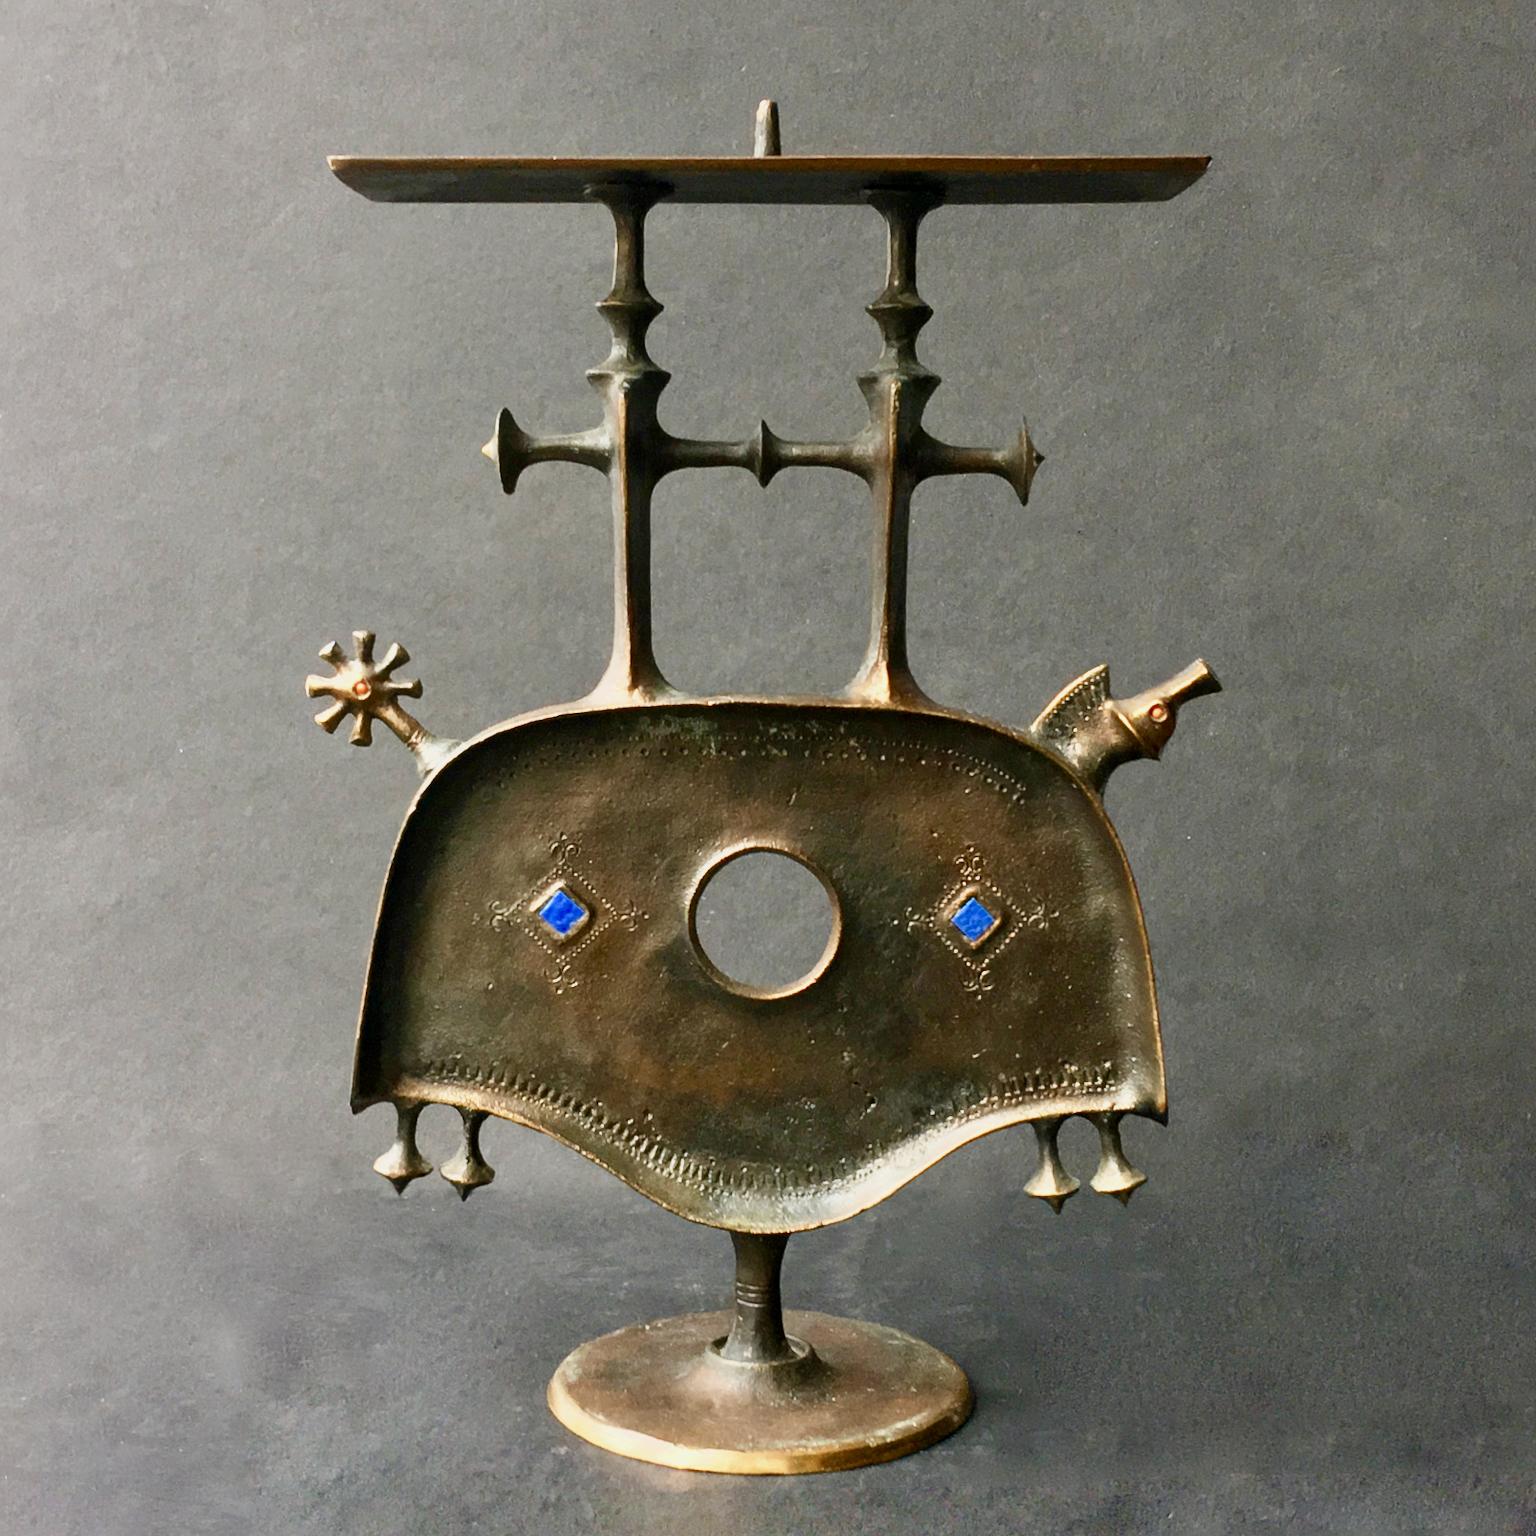 Sculptural bronze candleholder, with blue and red details. Made by Pap Zoltàn, Hungary, mid-20th century.

The sculpture depicts a stylized horse with caparison, and is in very nice original condition with age-appropriate wear and patina.